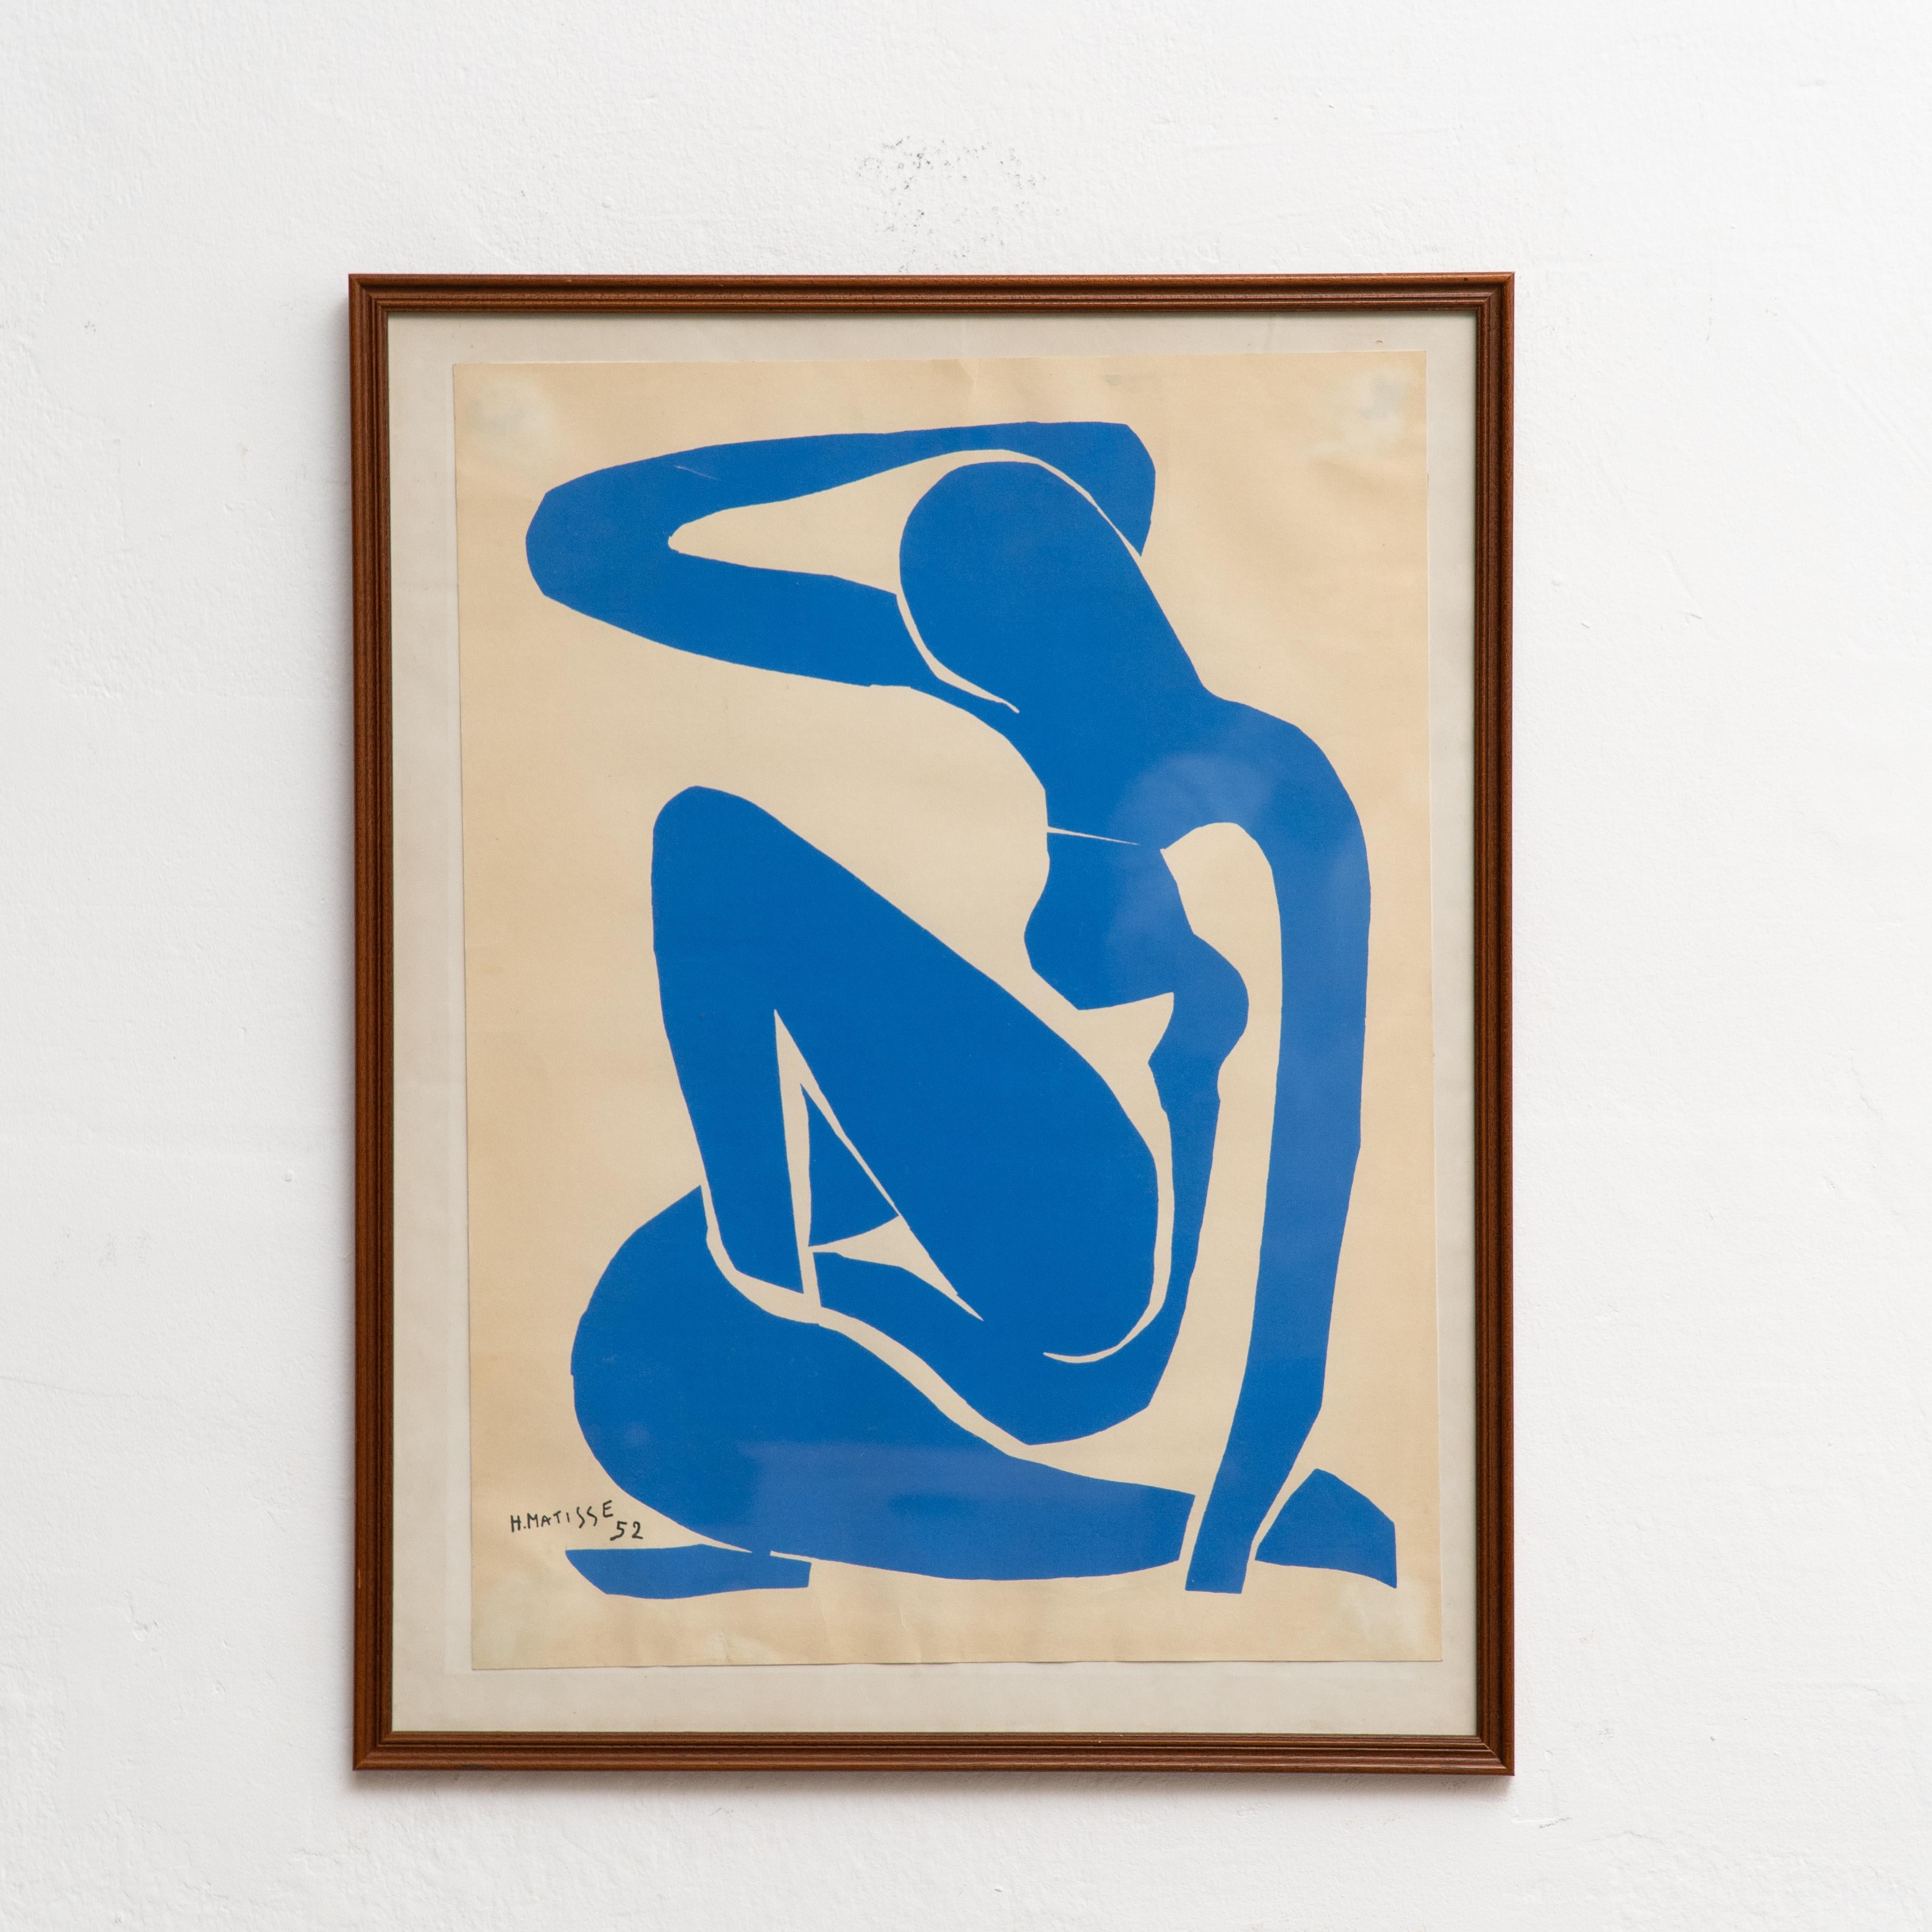 Color lithograph after the work by Henri Matisse, circa 1970.

Signed in the stone.
Edited by Edition des Nouvelles Images, France.
Framed.

In fair condition, with wear consistent of age and use, preserving a beautiful patina, as shown on the